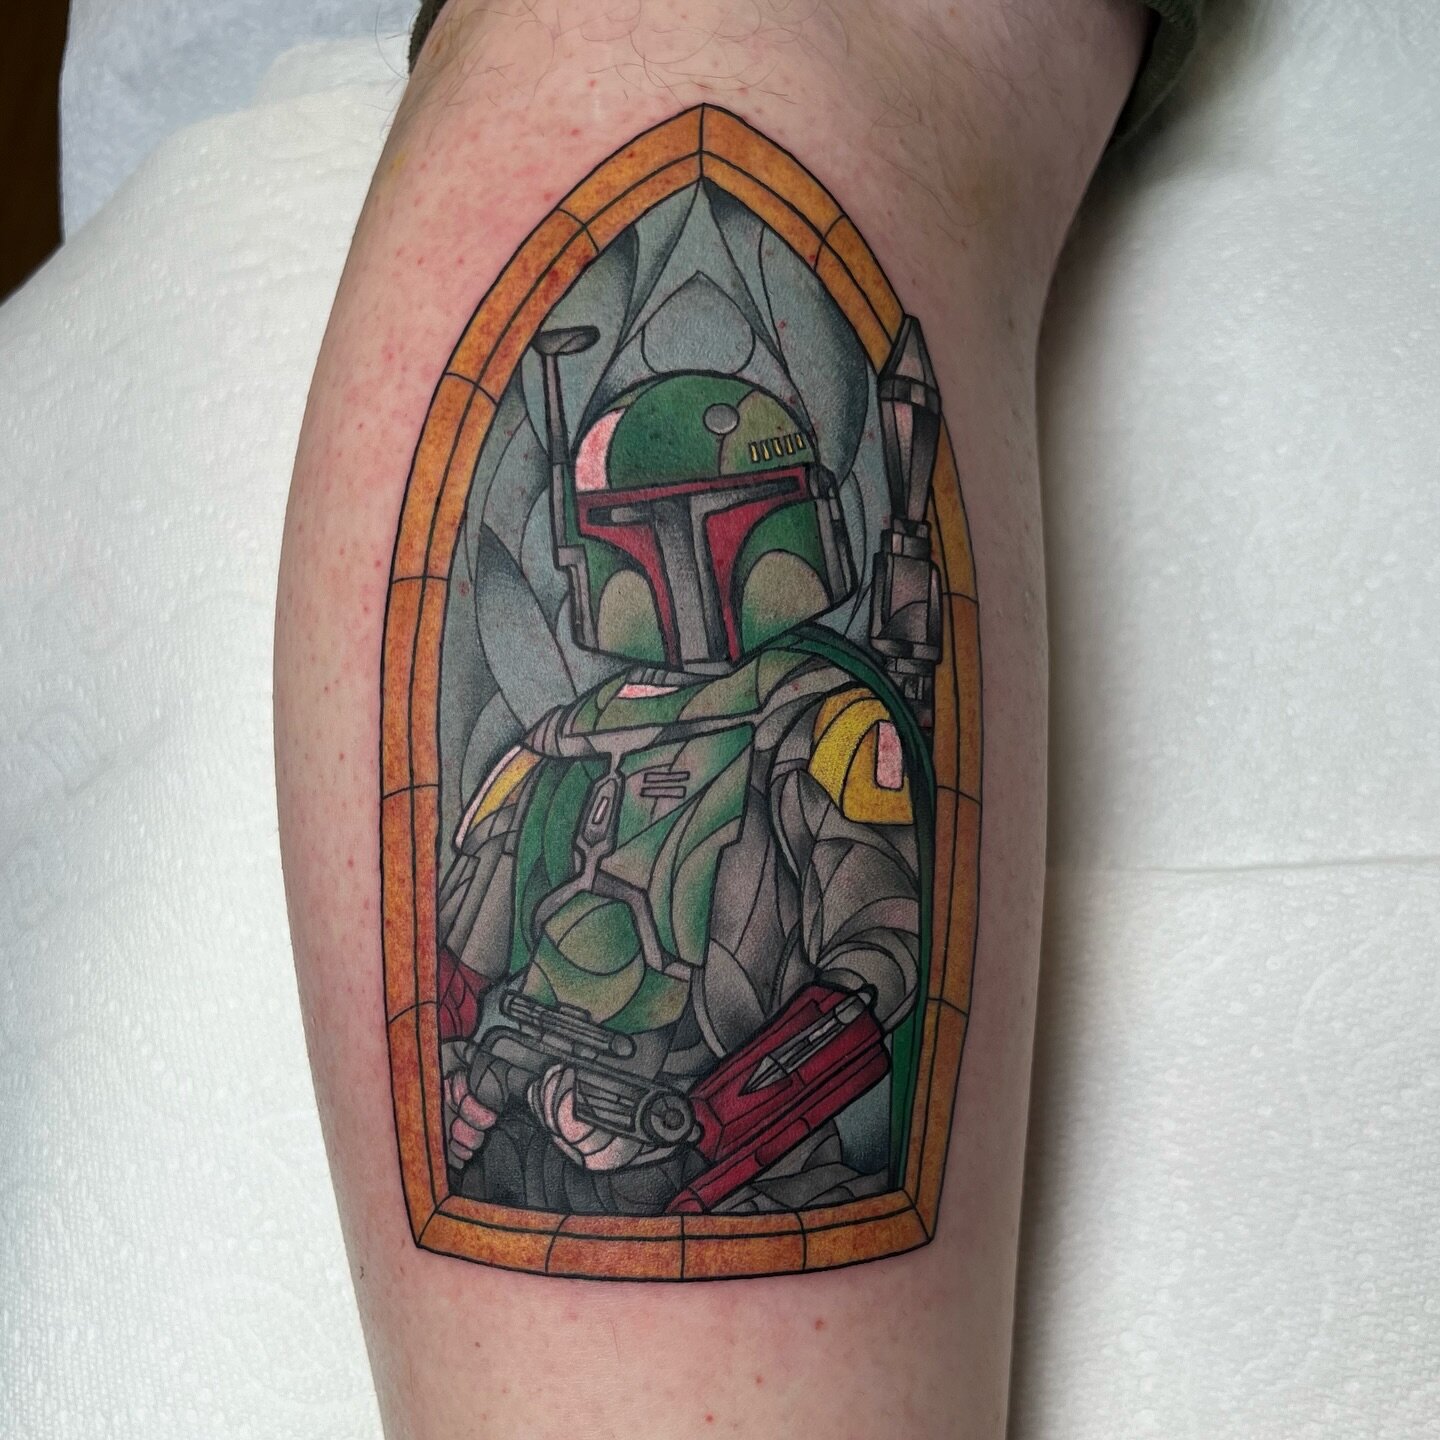 🌌 BOBA FETT STAINED GLASS 🌌 

✨ not sure what everyone prefers these days. But I like both video and stills. Can&rsquo;t wait to see this one healed and add on 😎 

❤️&zwj;🔥 who would you want in a stained glass window?!? 

@anarchy_tattoo_supplie